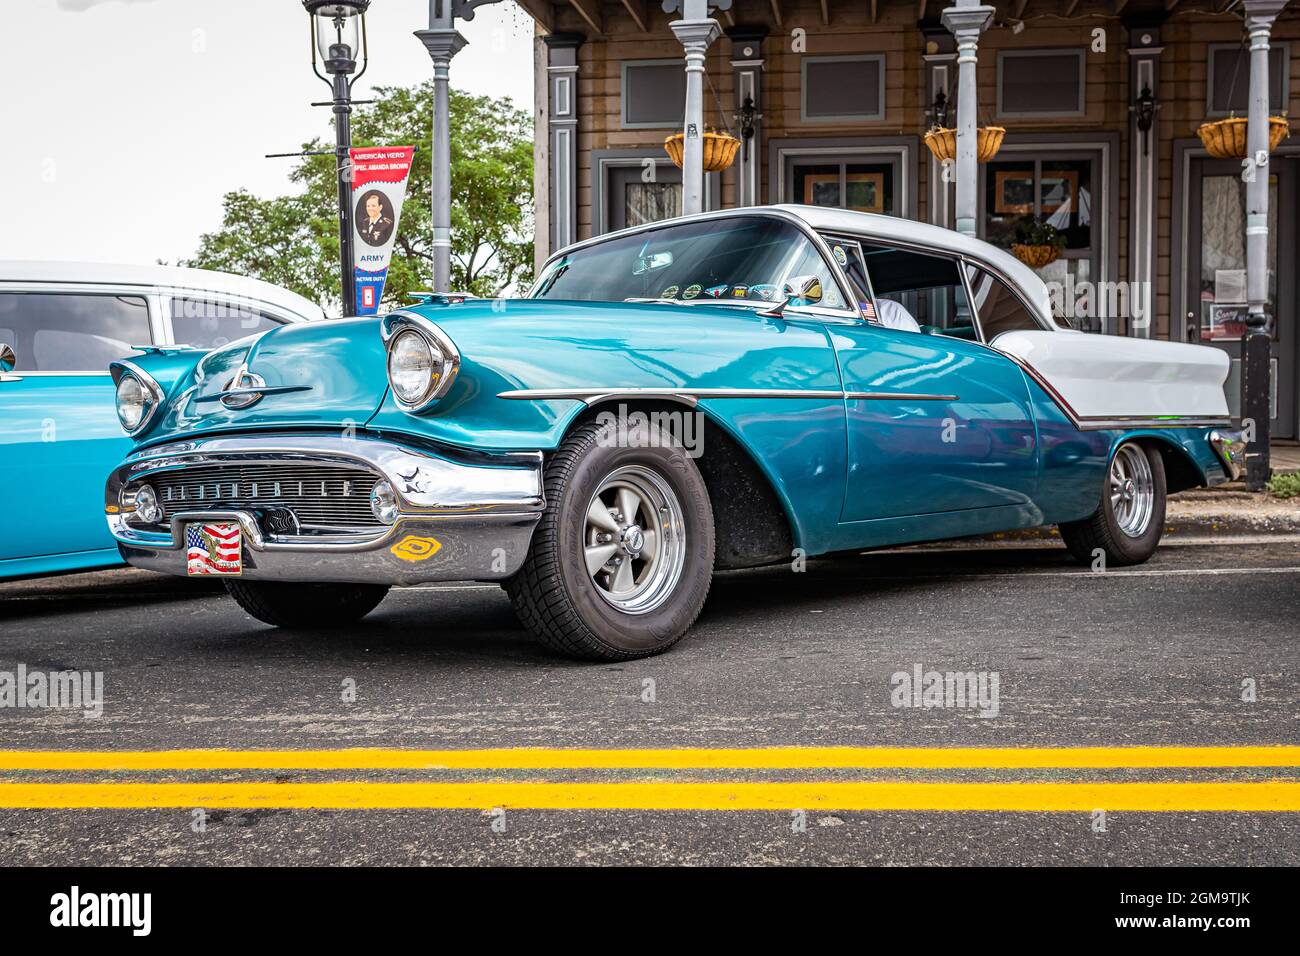 Virginia City, NV - July 30, 2021: 1957 Oldsmobile Golden Rocket 88 Hardtop Coupe at a local car show. Stock Photo